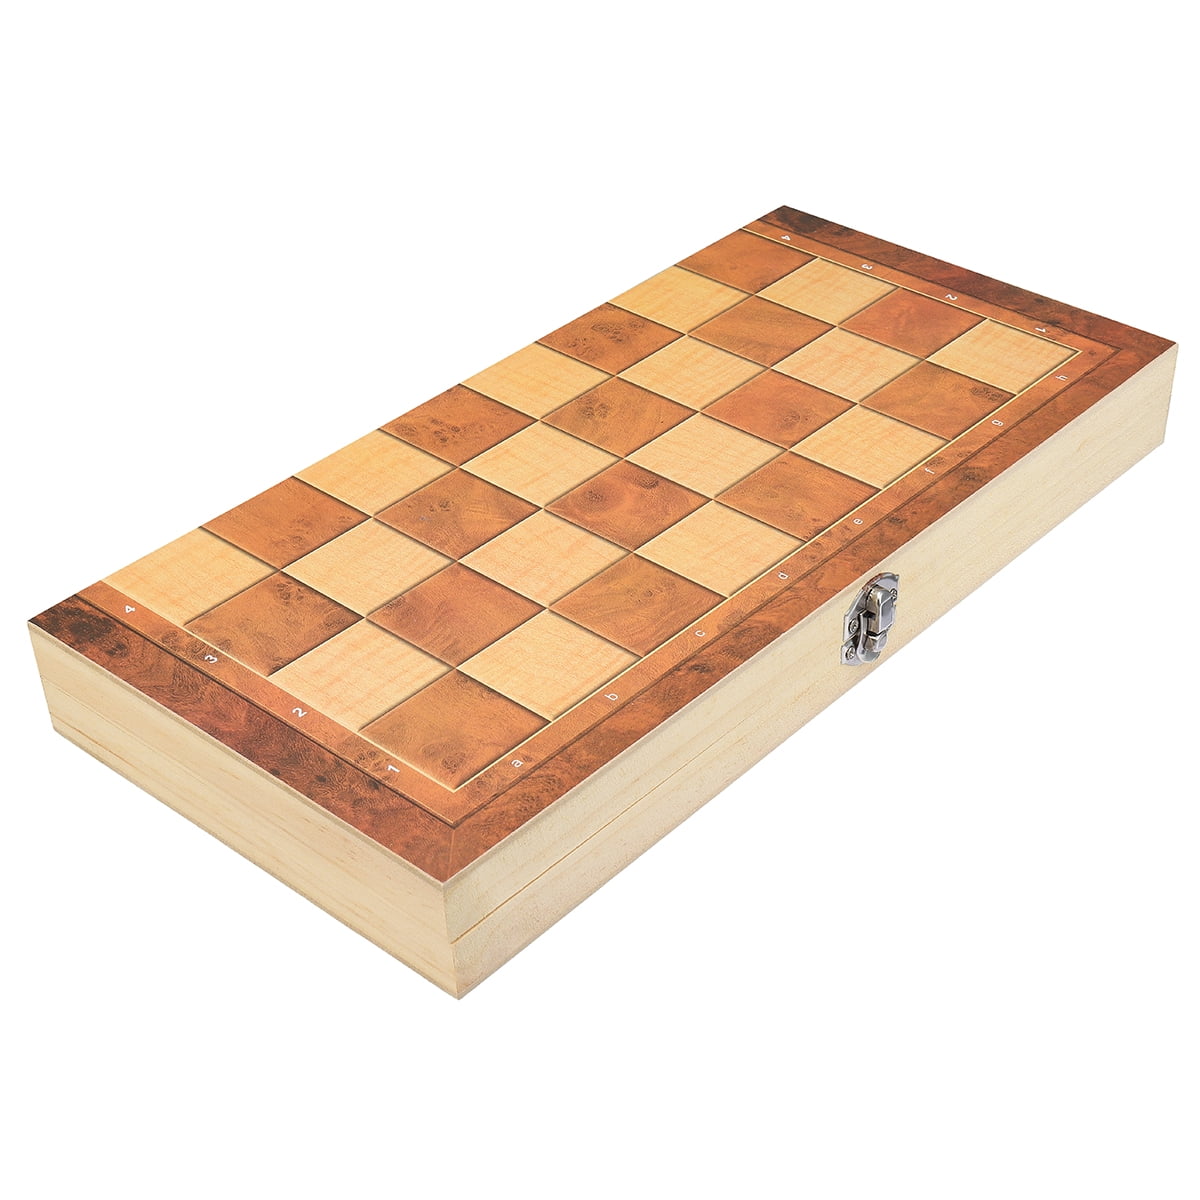 Wooden Chess Board,Traveling Chess Set,Diwali/Christmas Day Gift. 12*12 Inches Indian Handmade Solid Wooden Roll Up Travel Chess Board Set